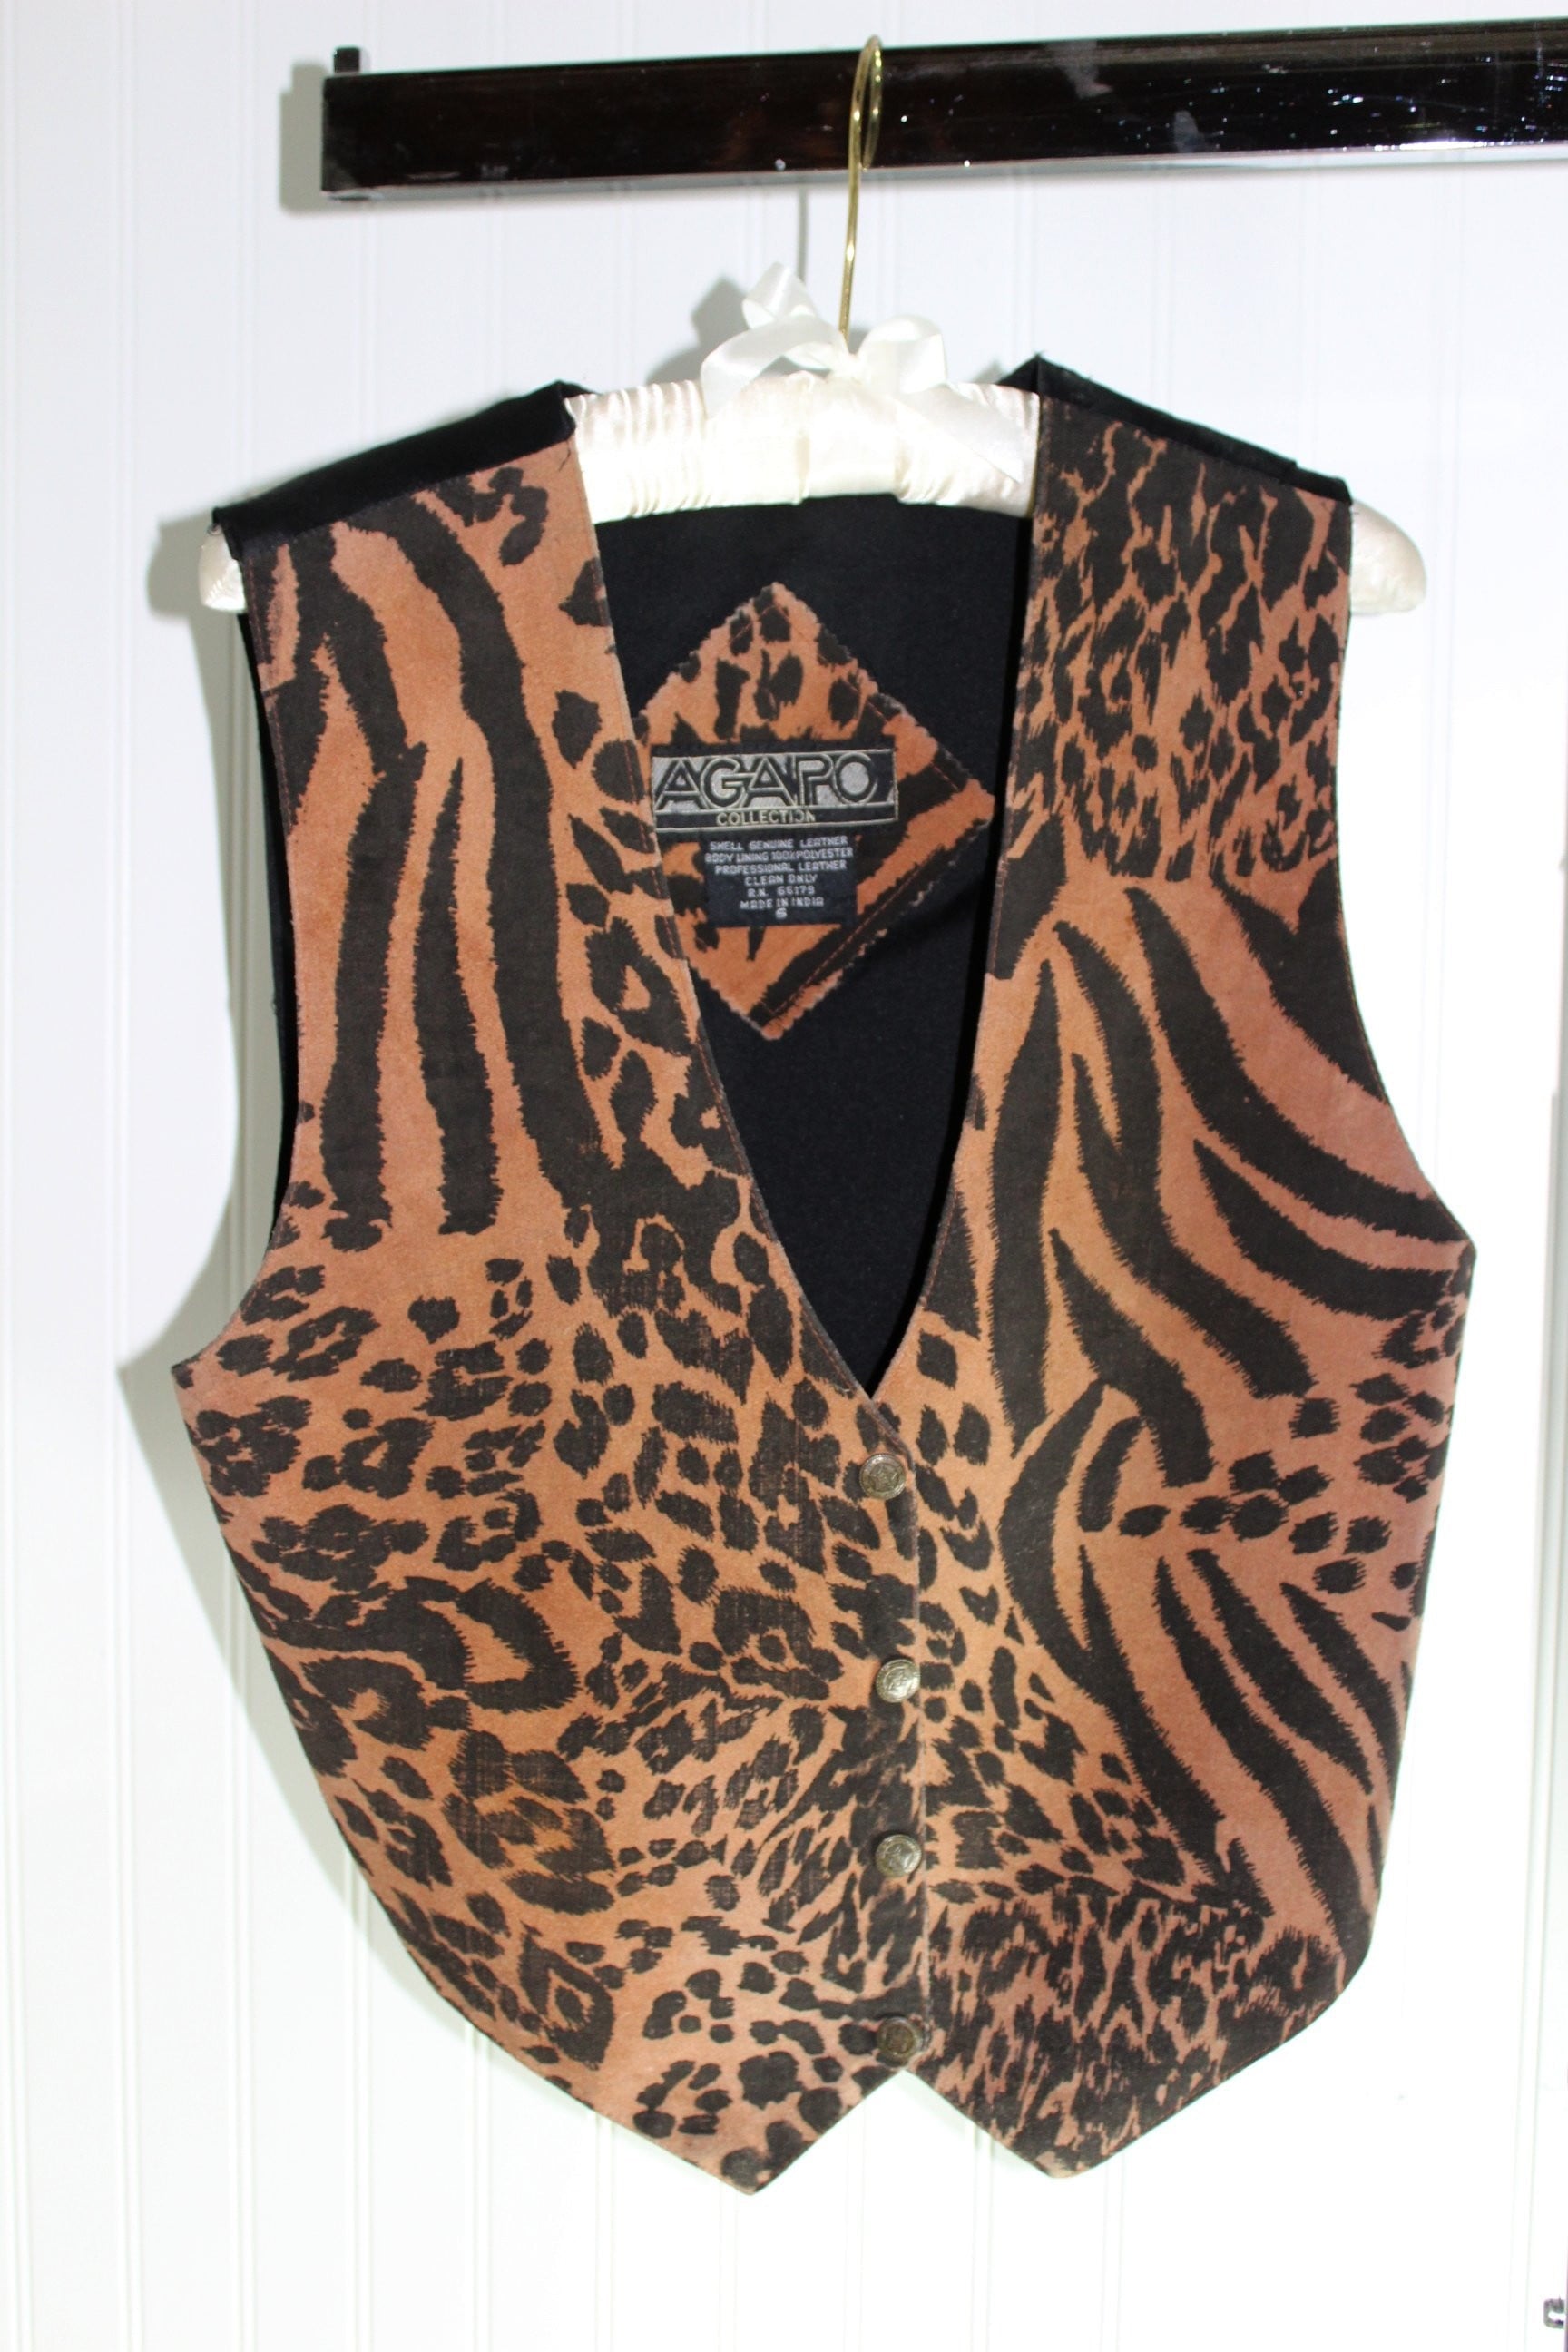 Suede Leather Vest Leopard Print AGAPO Snaps Oklahoma 1907 Seal Replica lined